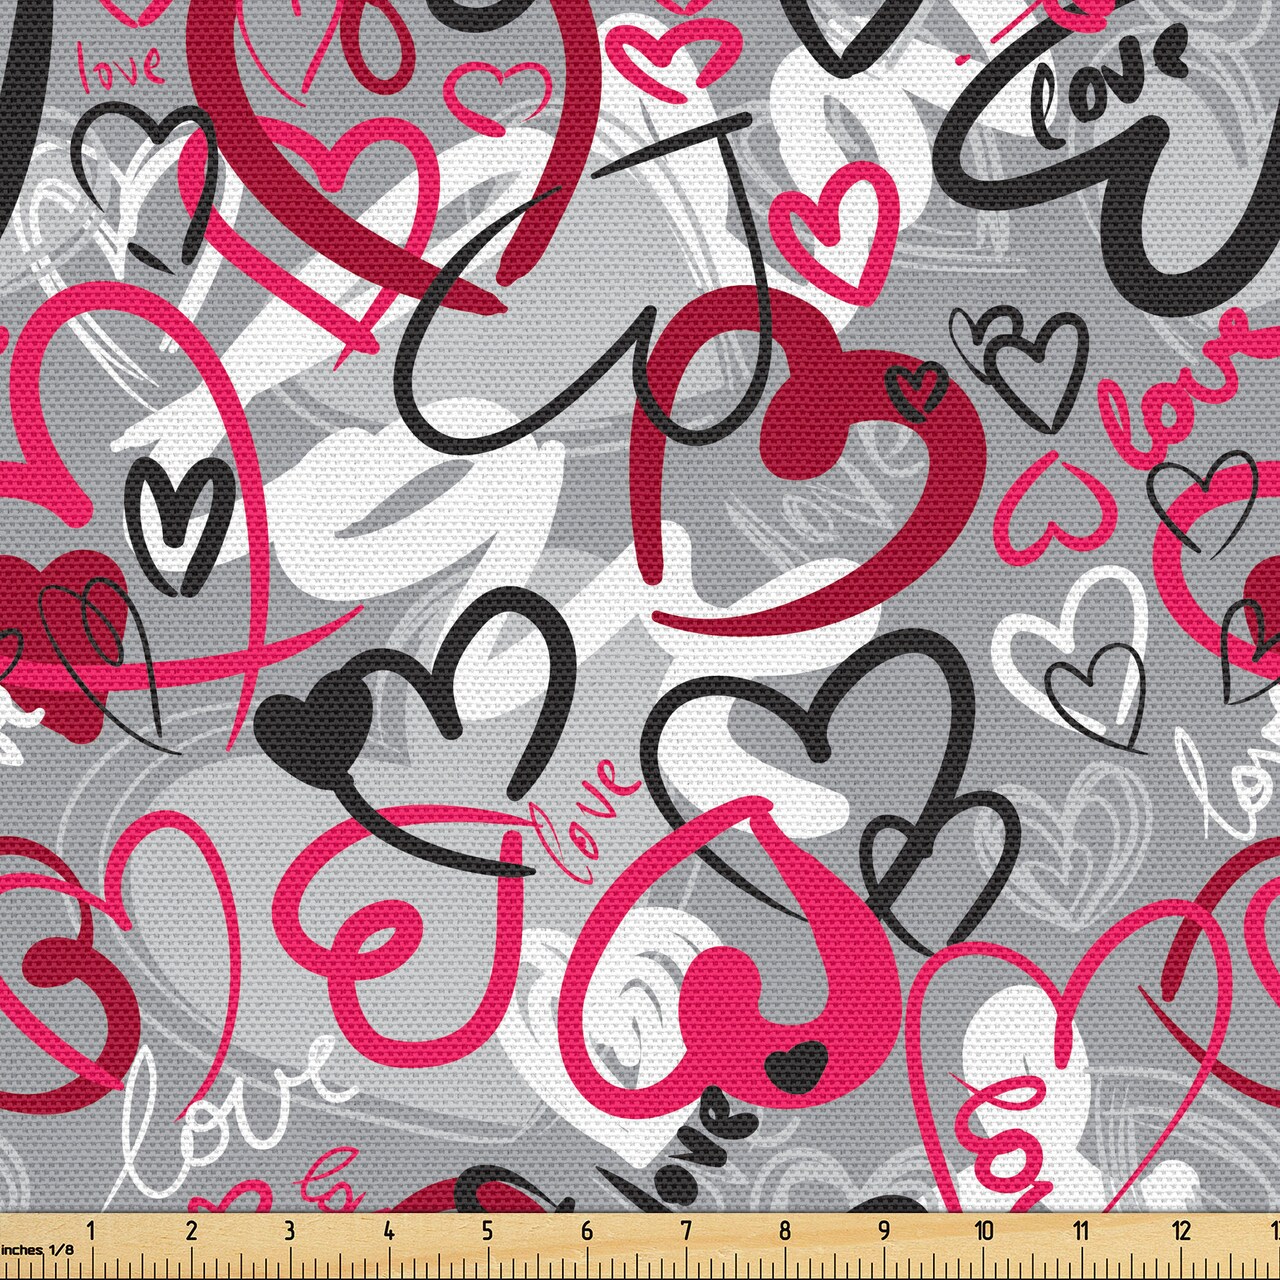 Ambesonne Love Fabric by the Yard, Romantic Random Hand Drawn Style Hearts and Love Words Crazy Romance Valentines, Decorative Fabric for Upholstery and Home Accents, 1 Yard, Red Grey